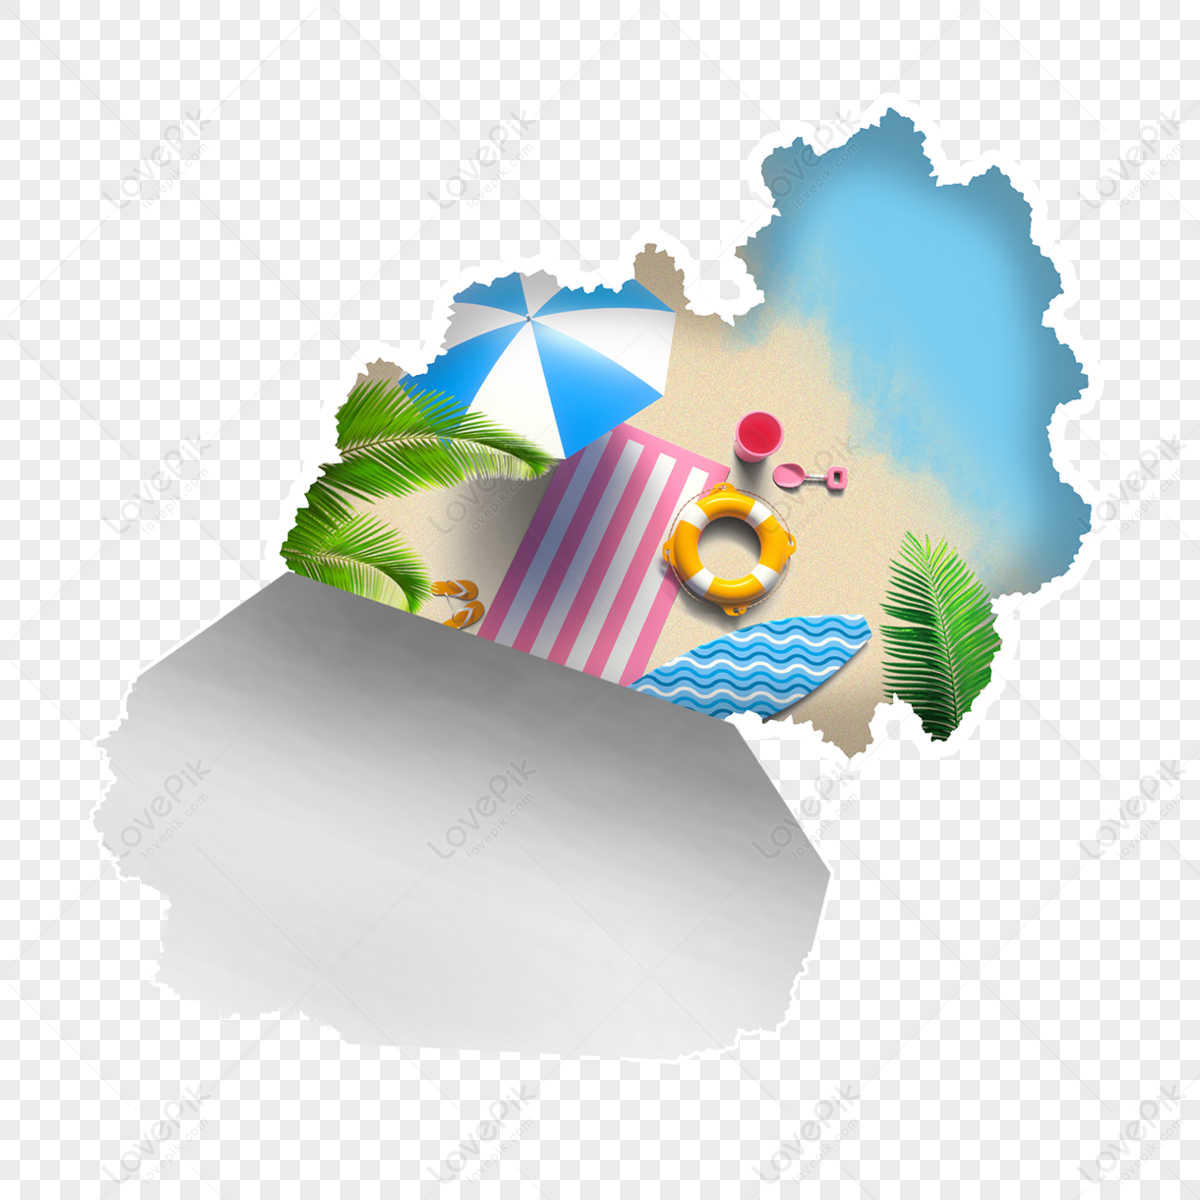 Rip PNG Images With Transparent Background